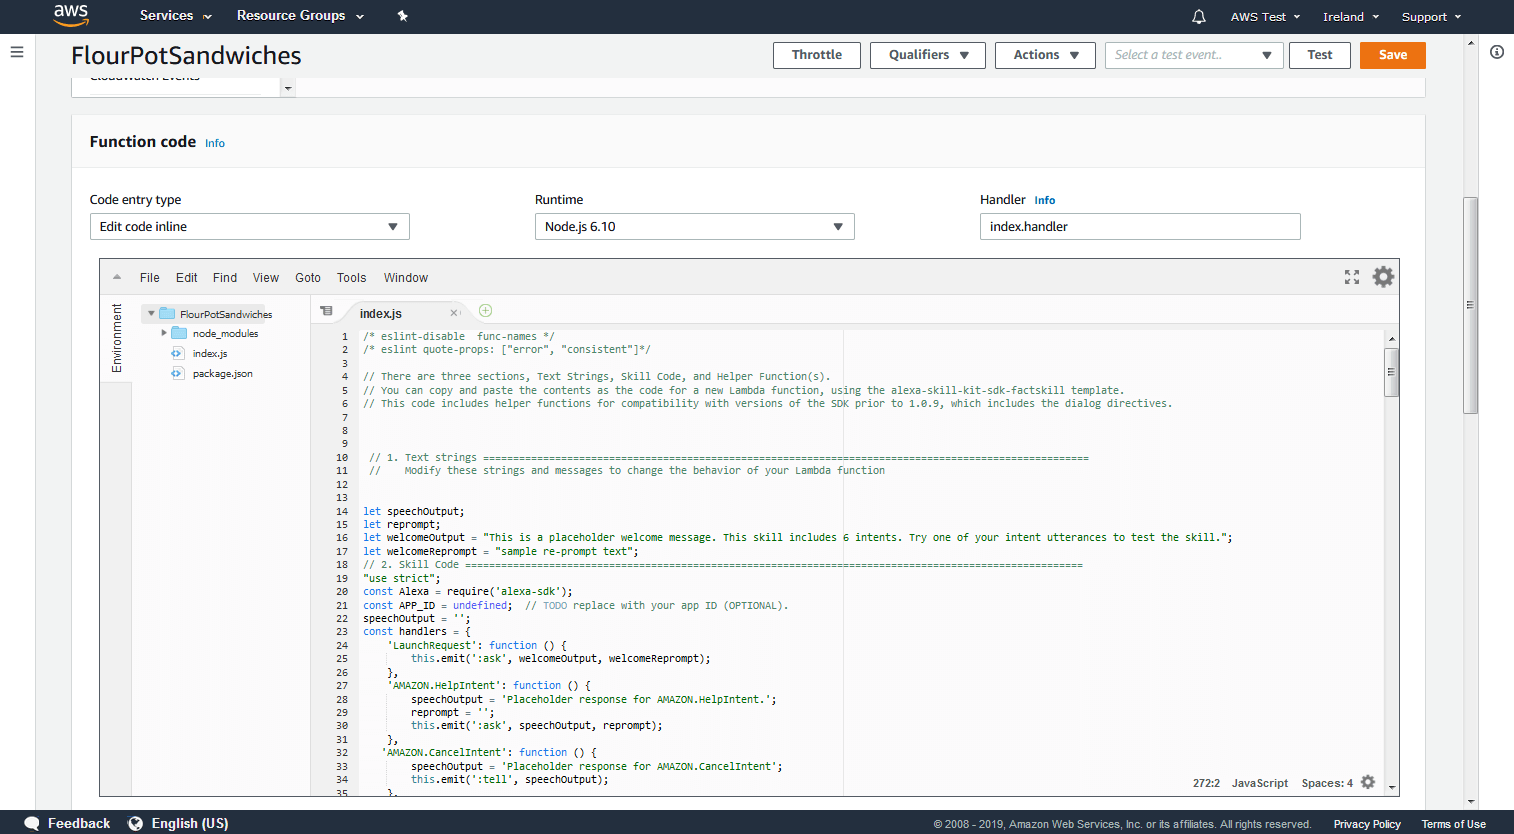 AWS Management Console: Lambda template for the function code